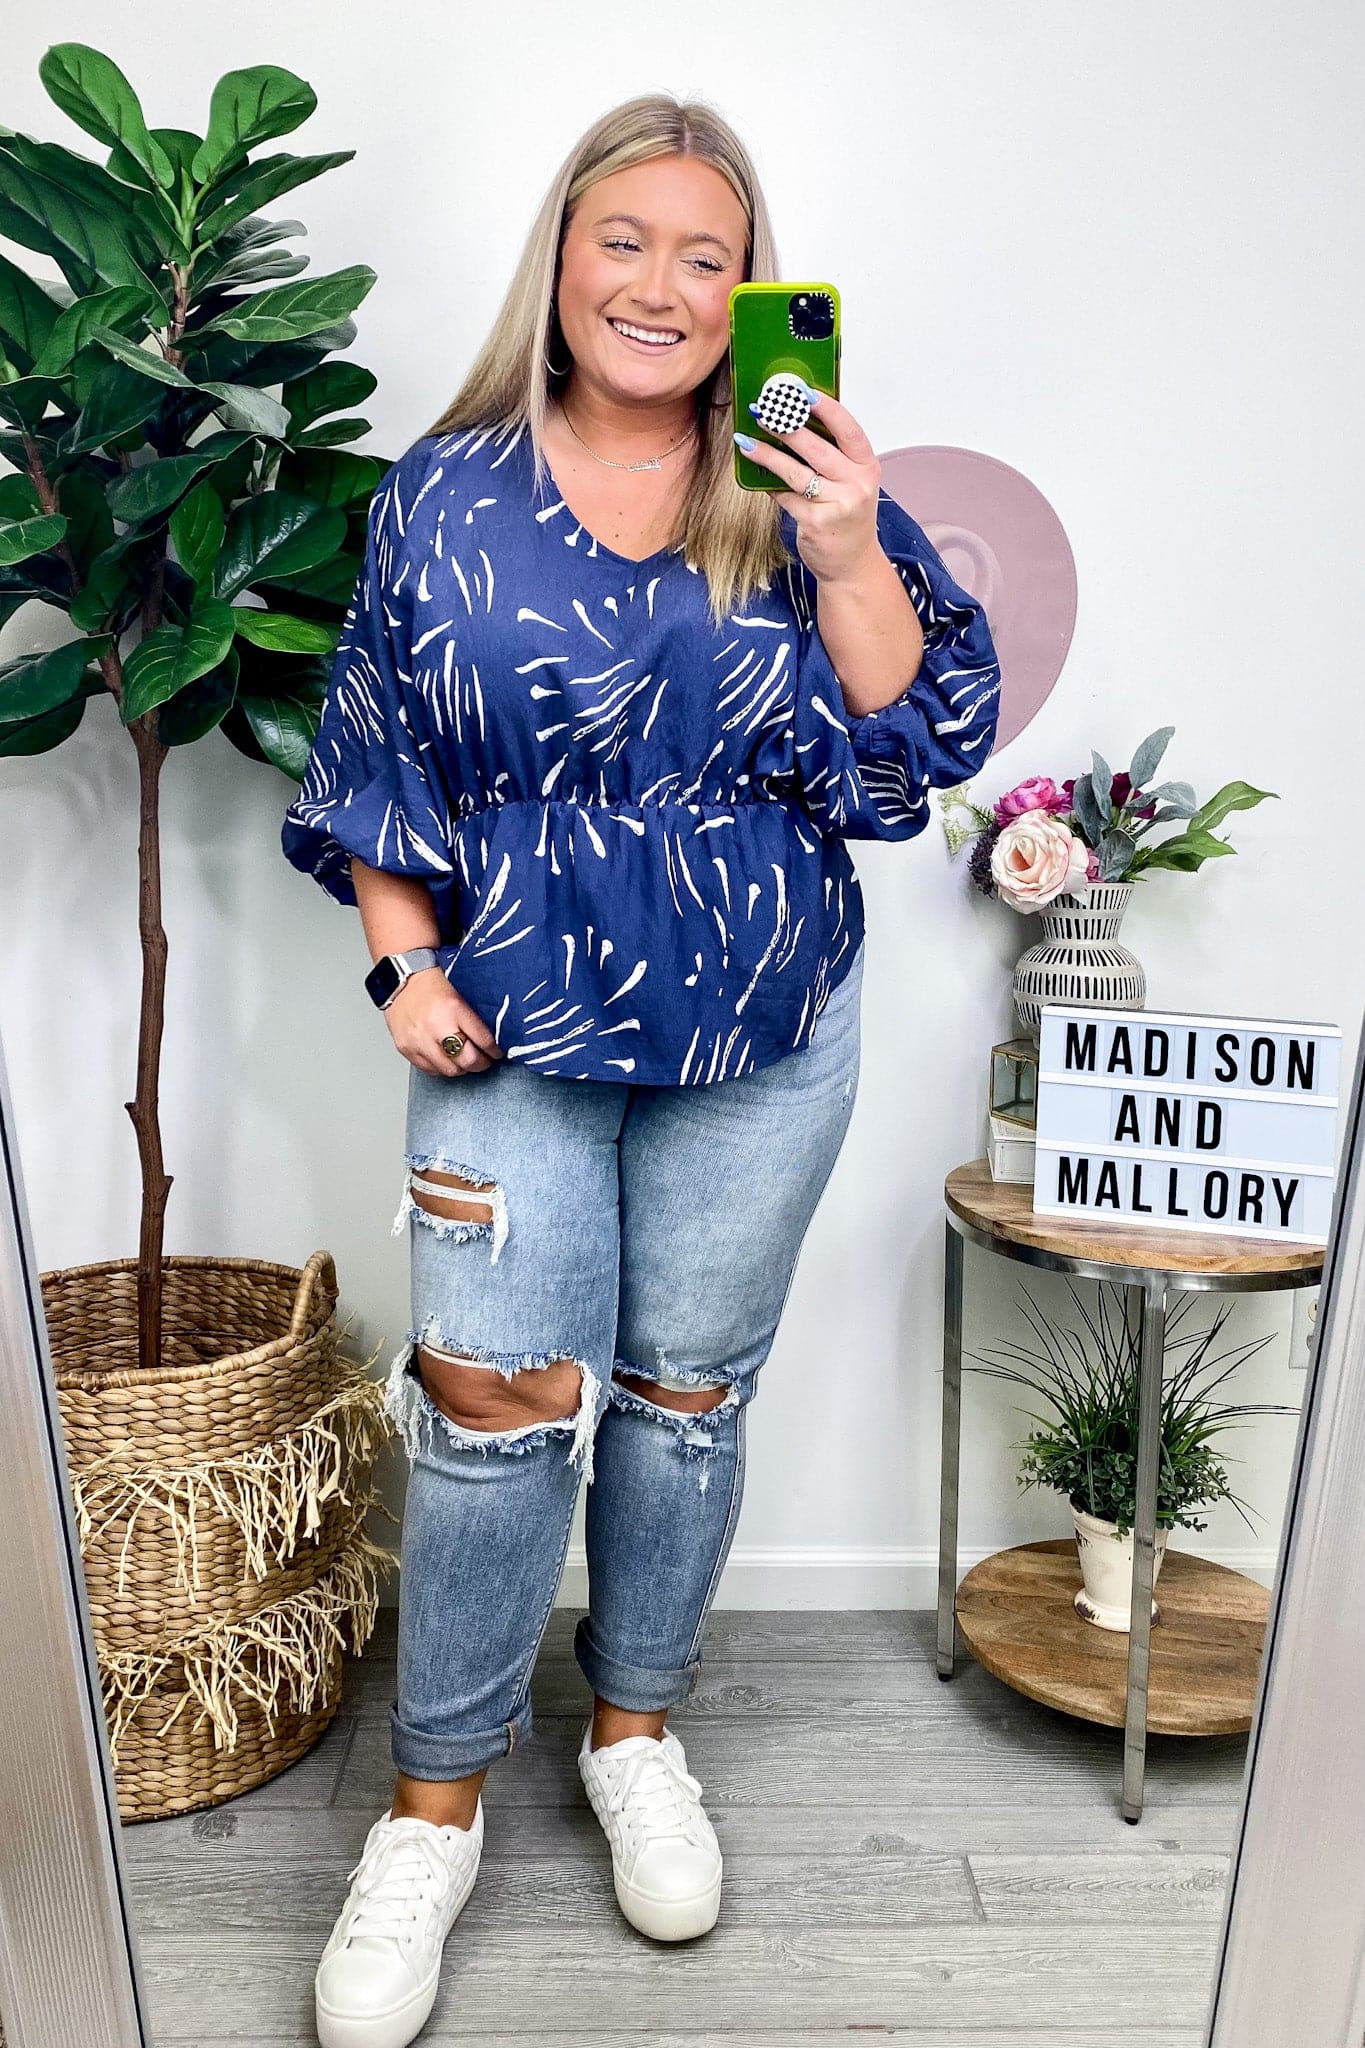  Relaxing Getaway Elastic Waist Top - FINAL SALE - Madison and Mallory